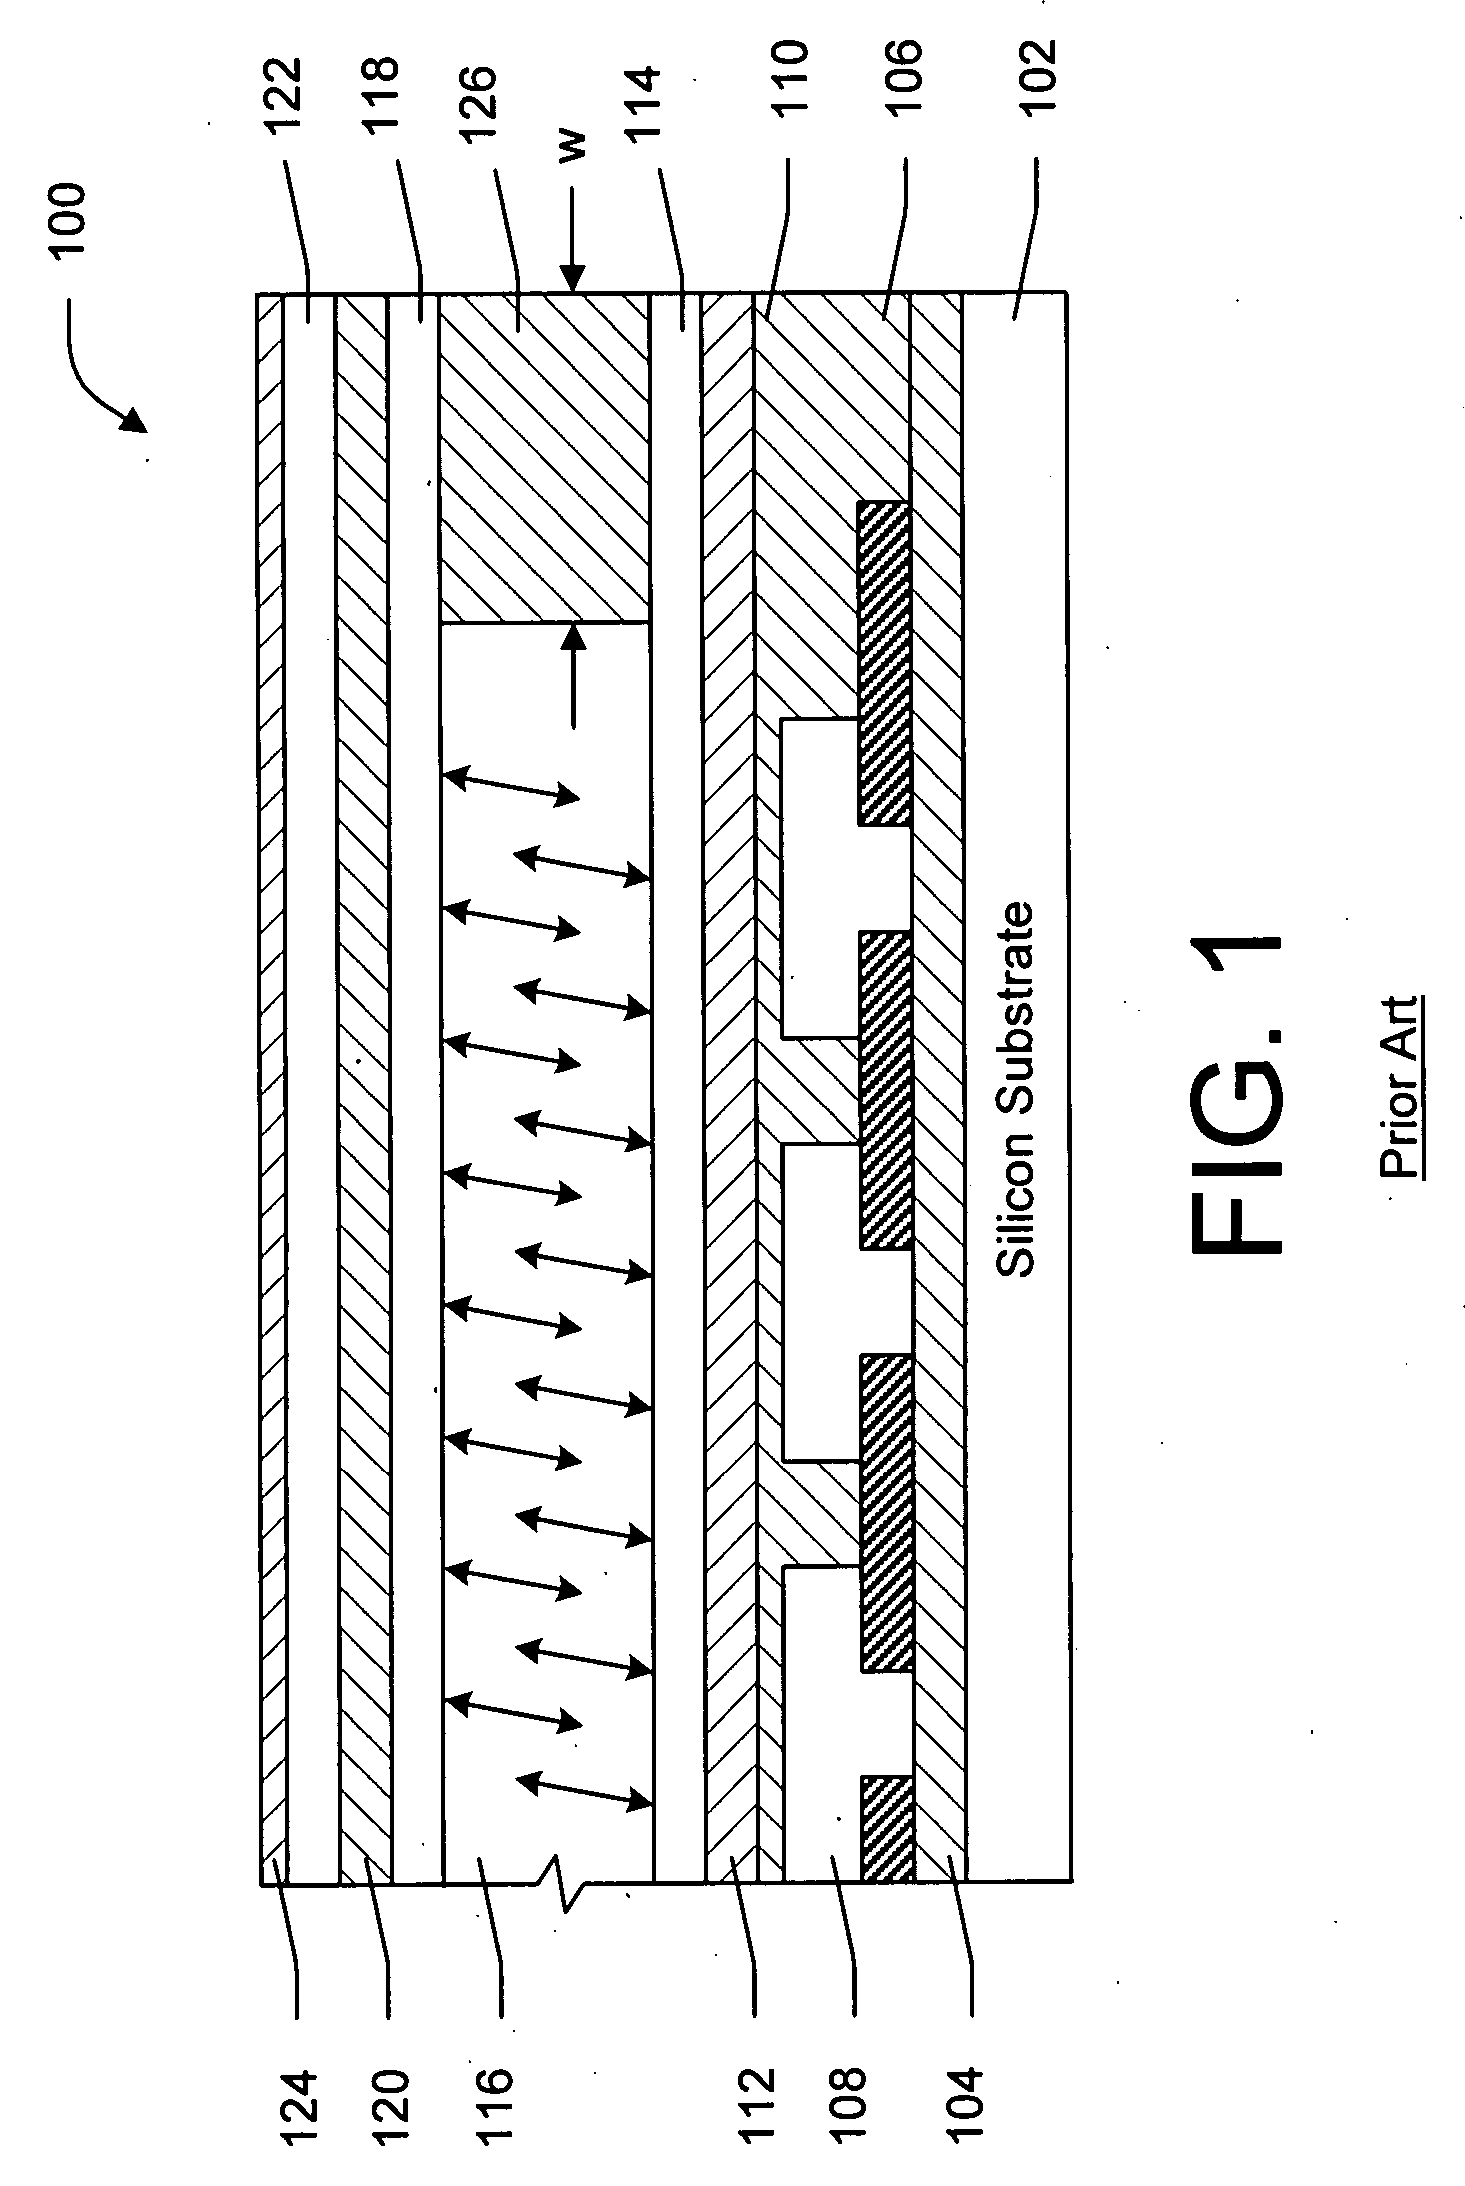 Method for manufacturing liquid crystal display devices and devices manufactured thereby